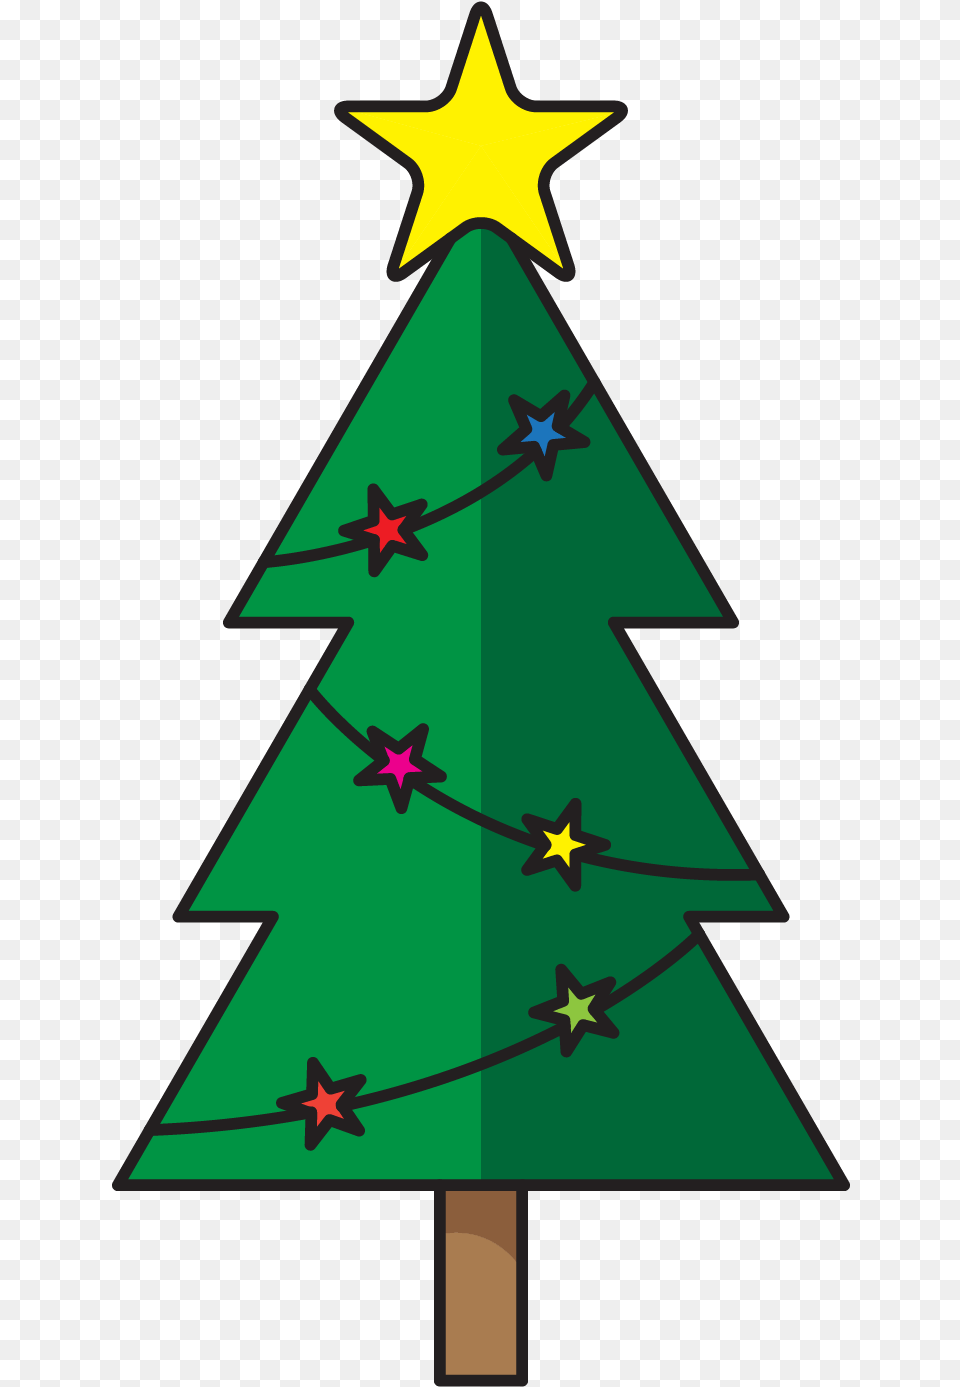 Christmas Tree Icon With Star Clipart Christmas Tree Small, Star Symbol, Symbol, Christmas Decorations, Festival Free Transparent Png